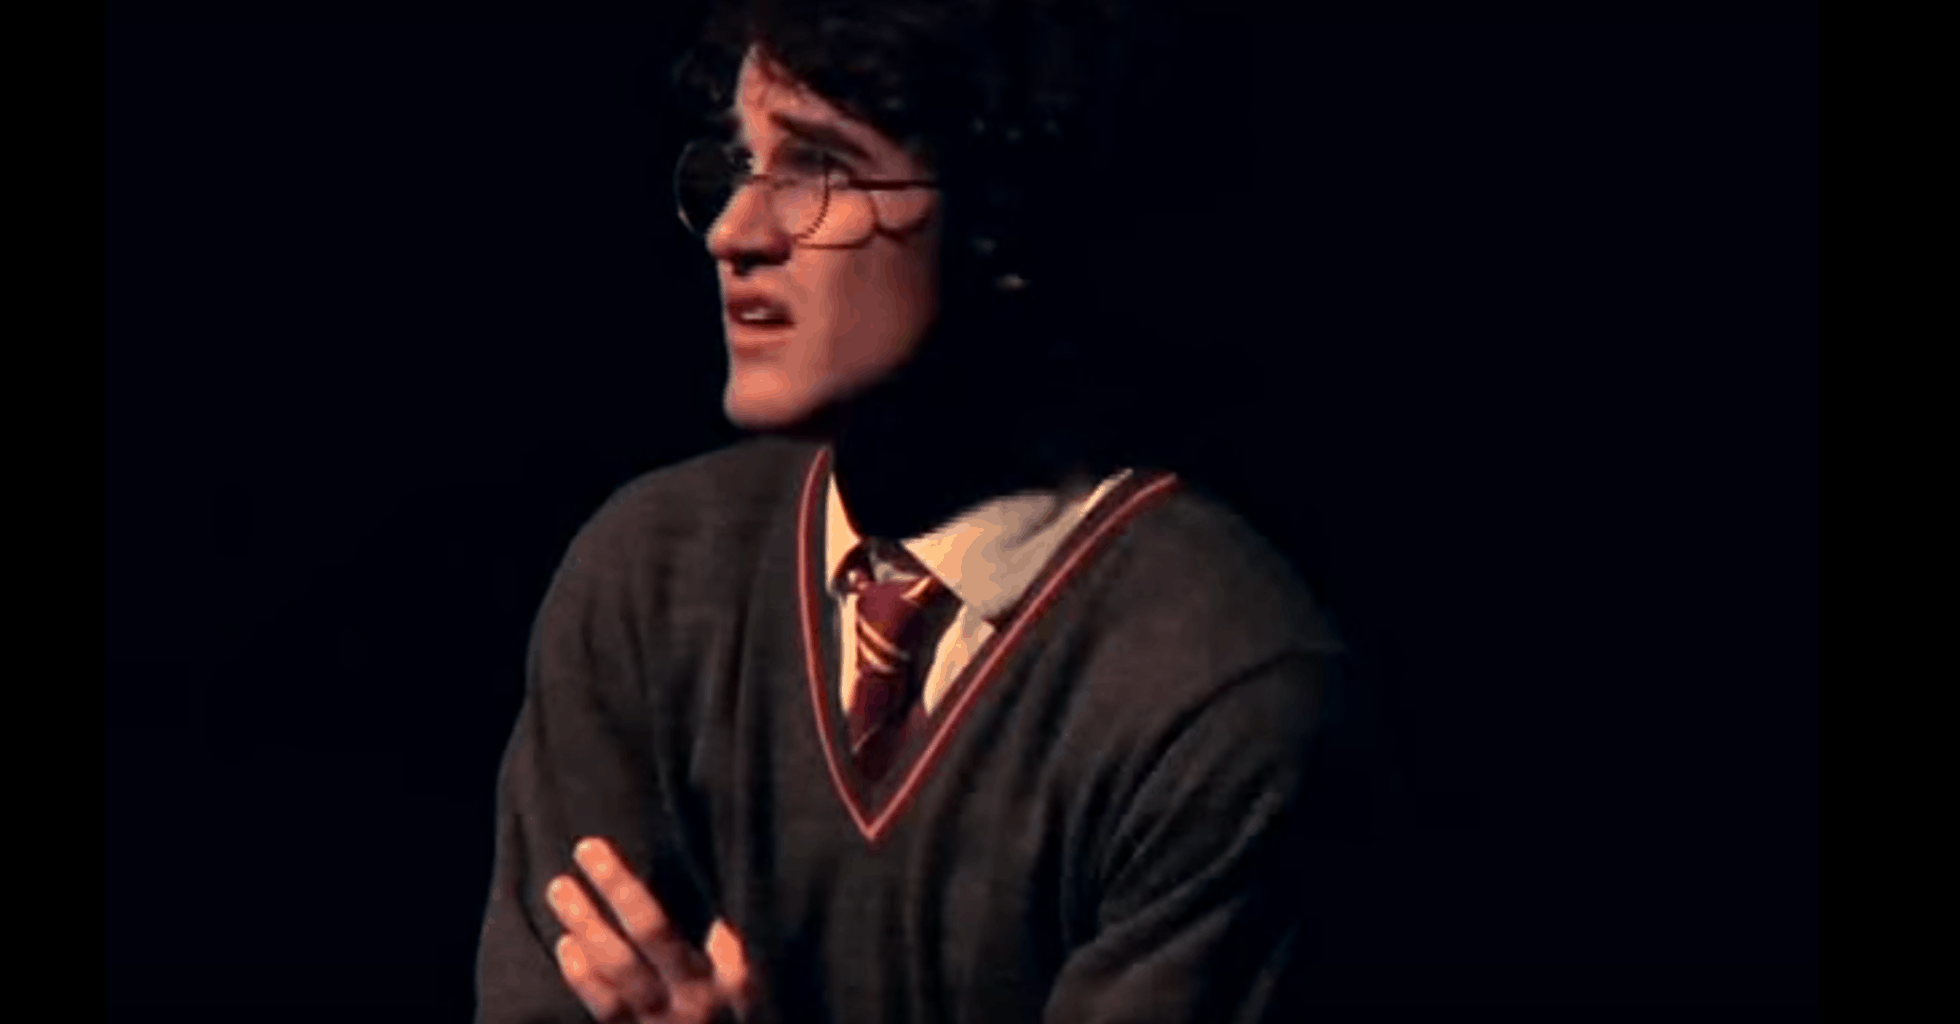 A Very Potter Musical